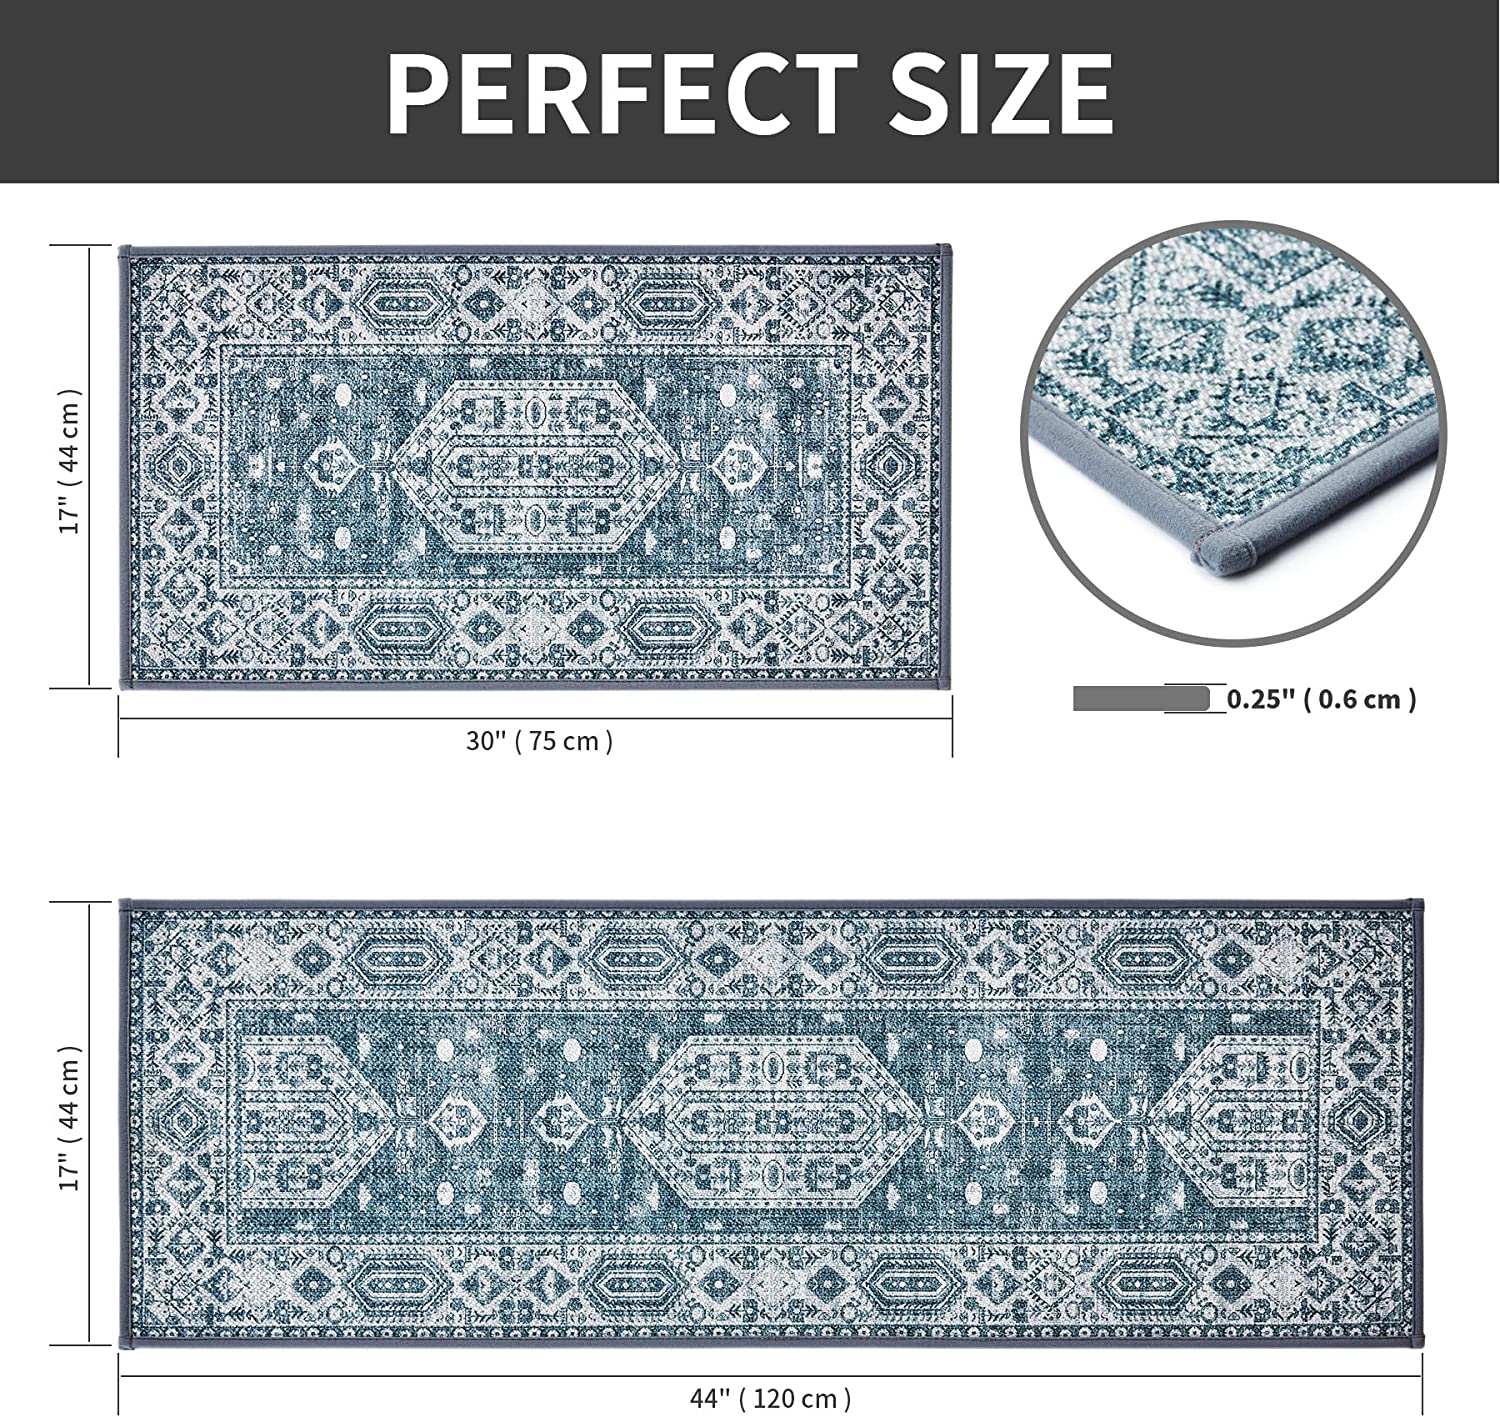 Chef Kitchen Rugs Sets of 2, 17 x 47 + 17 x 30 Inch – Modern Rugs